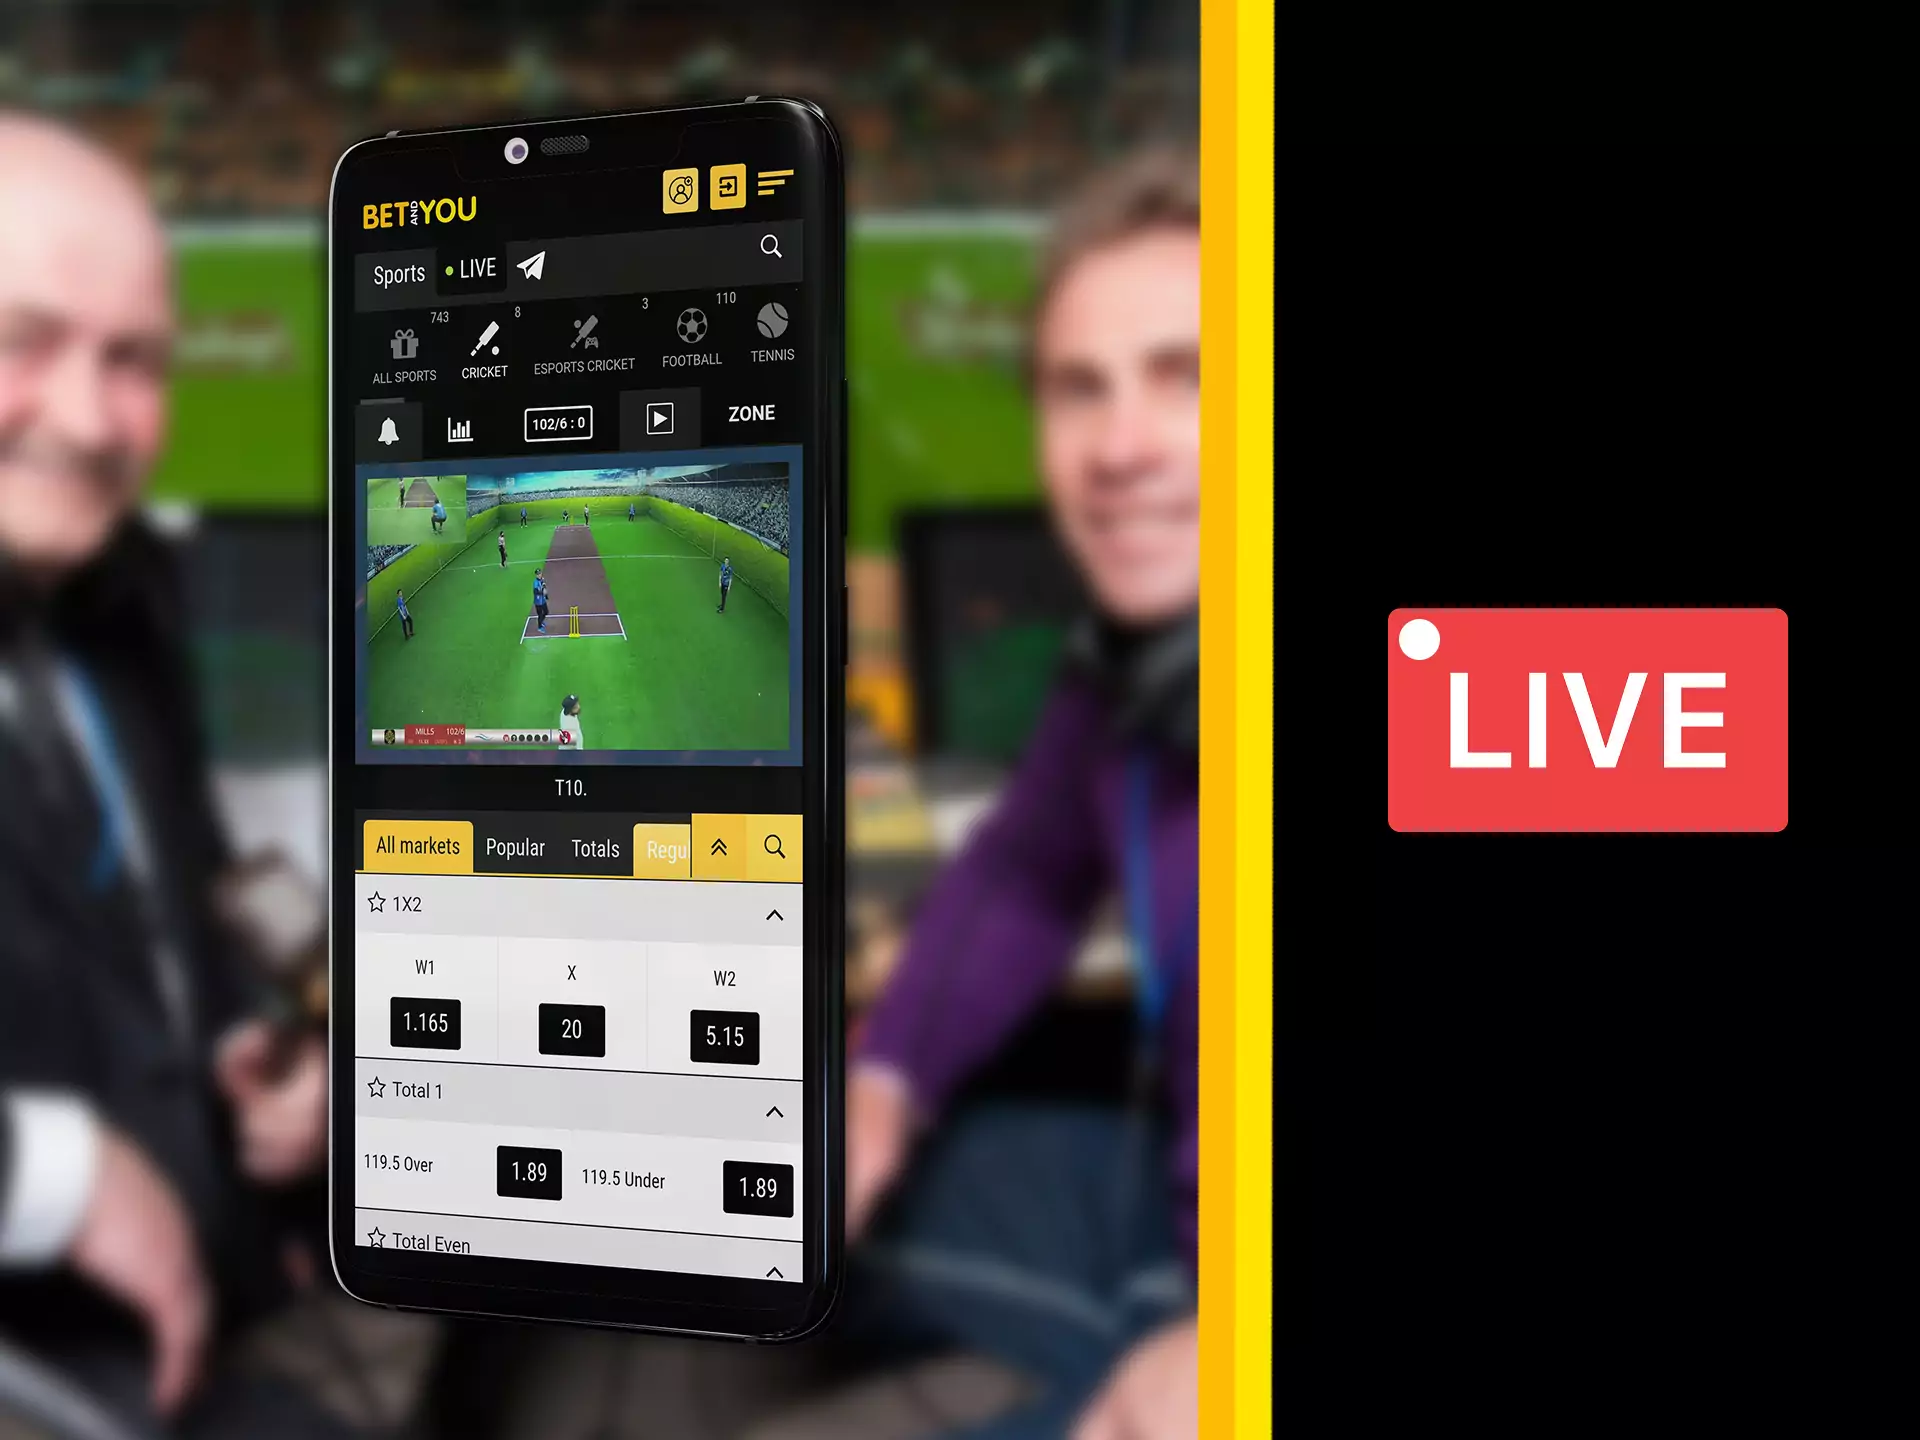 In the Betandyou App you can watch live broadcasts.